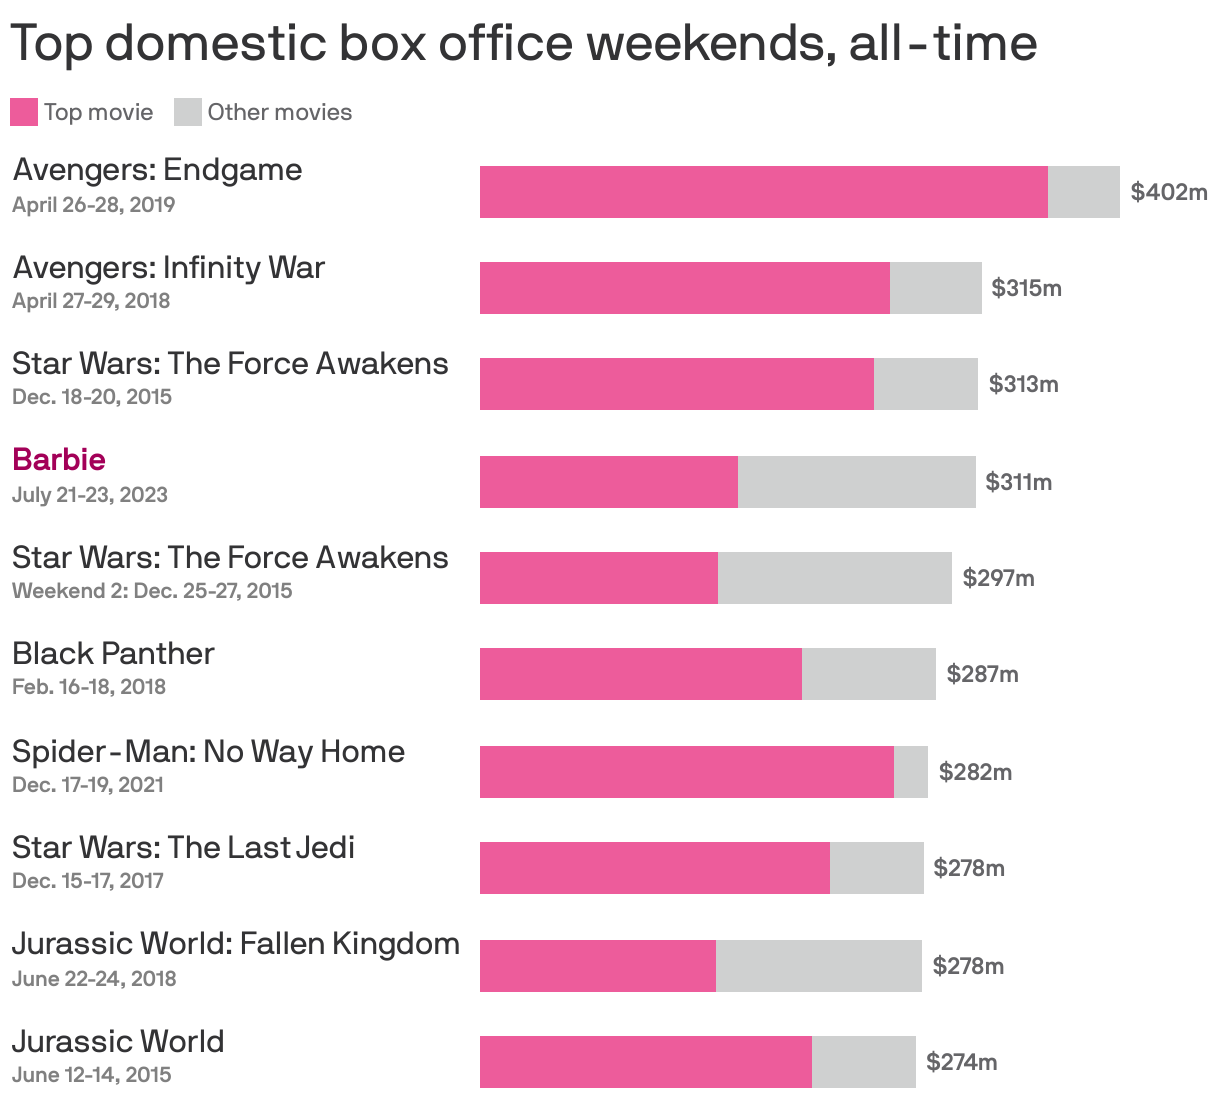 Top domestic box office weekends, all-time